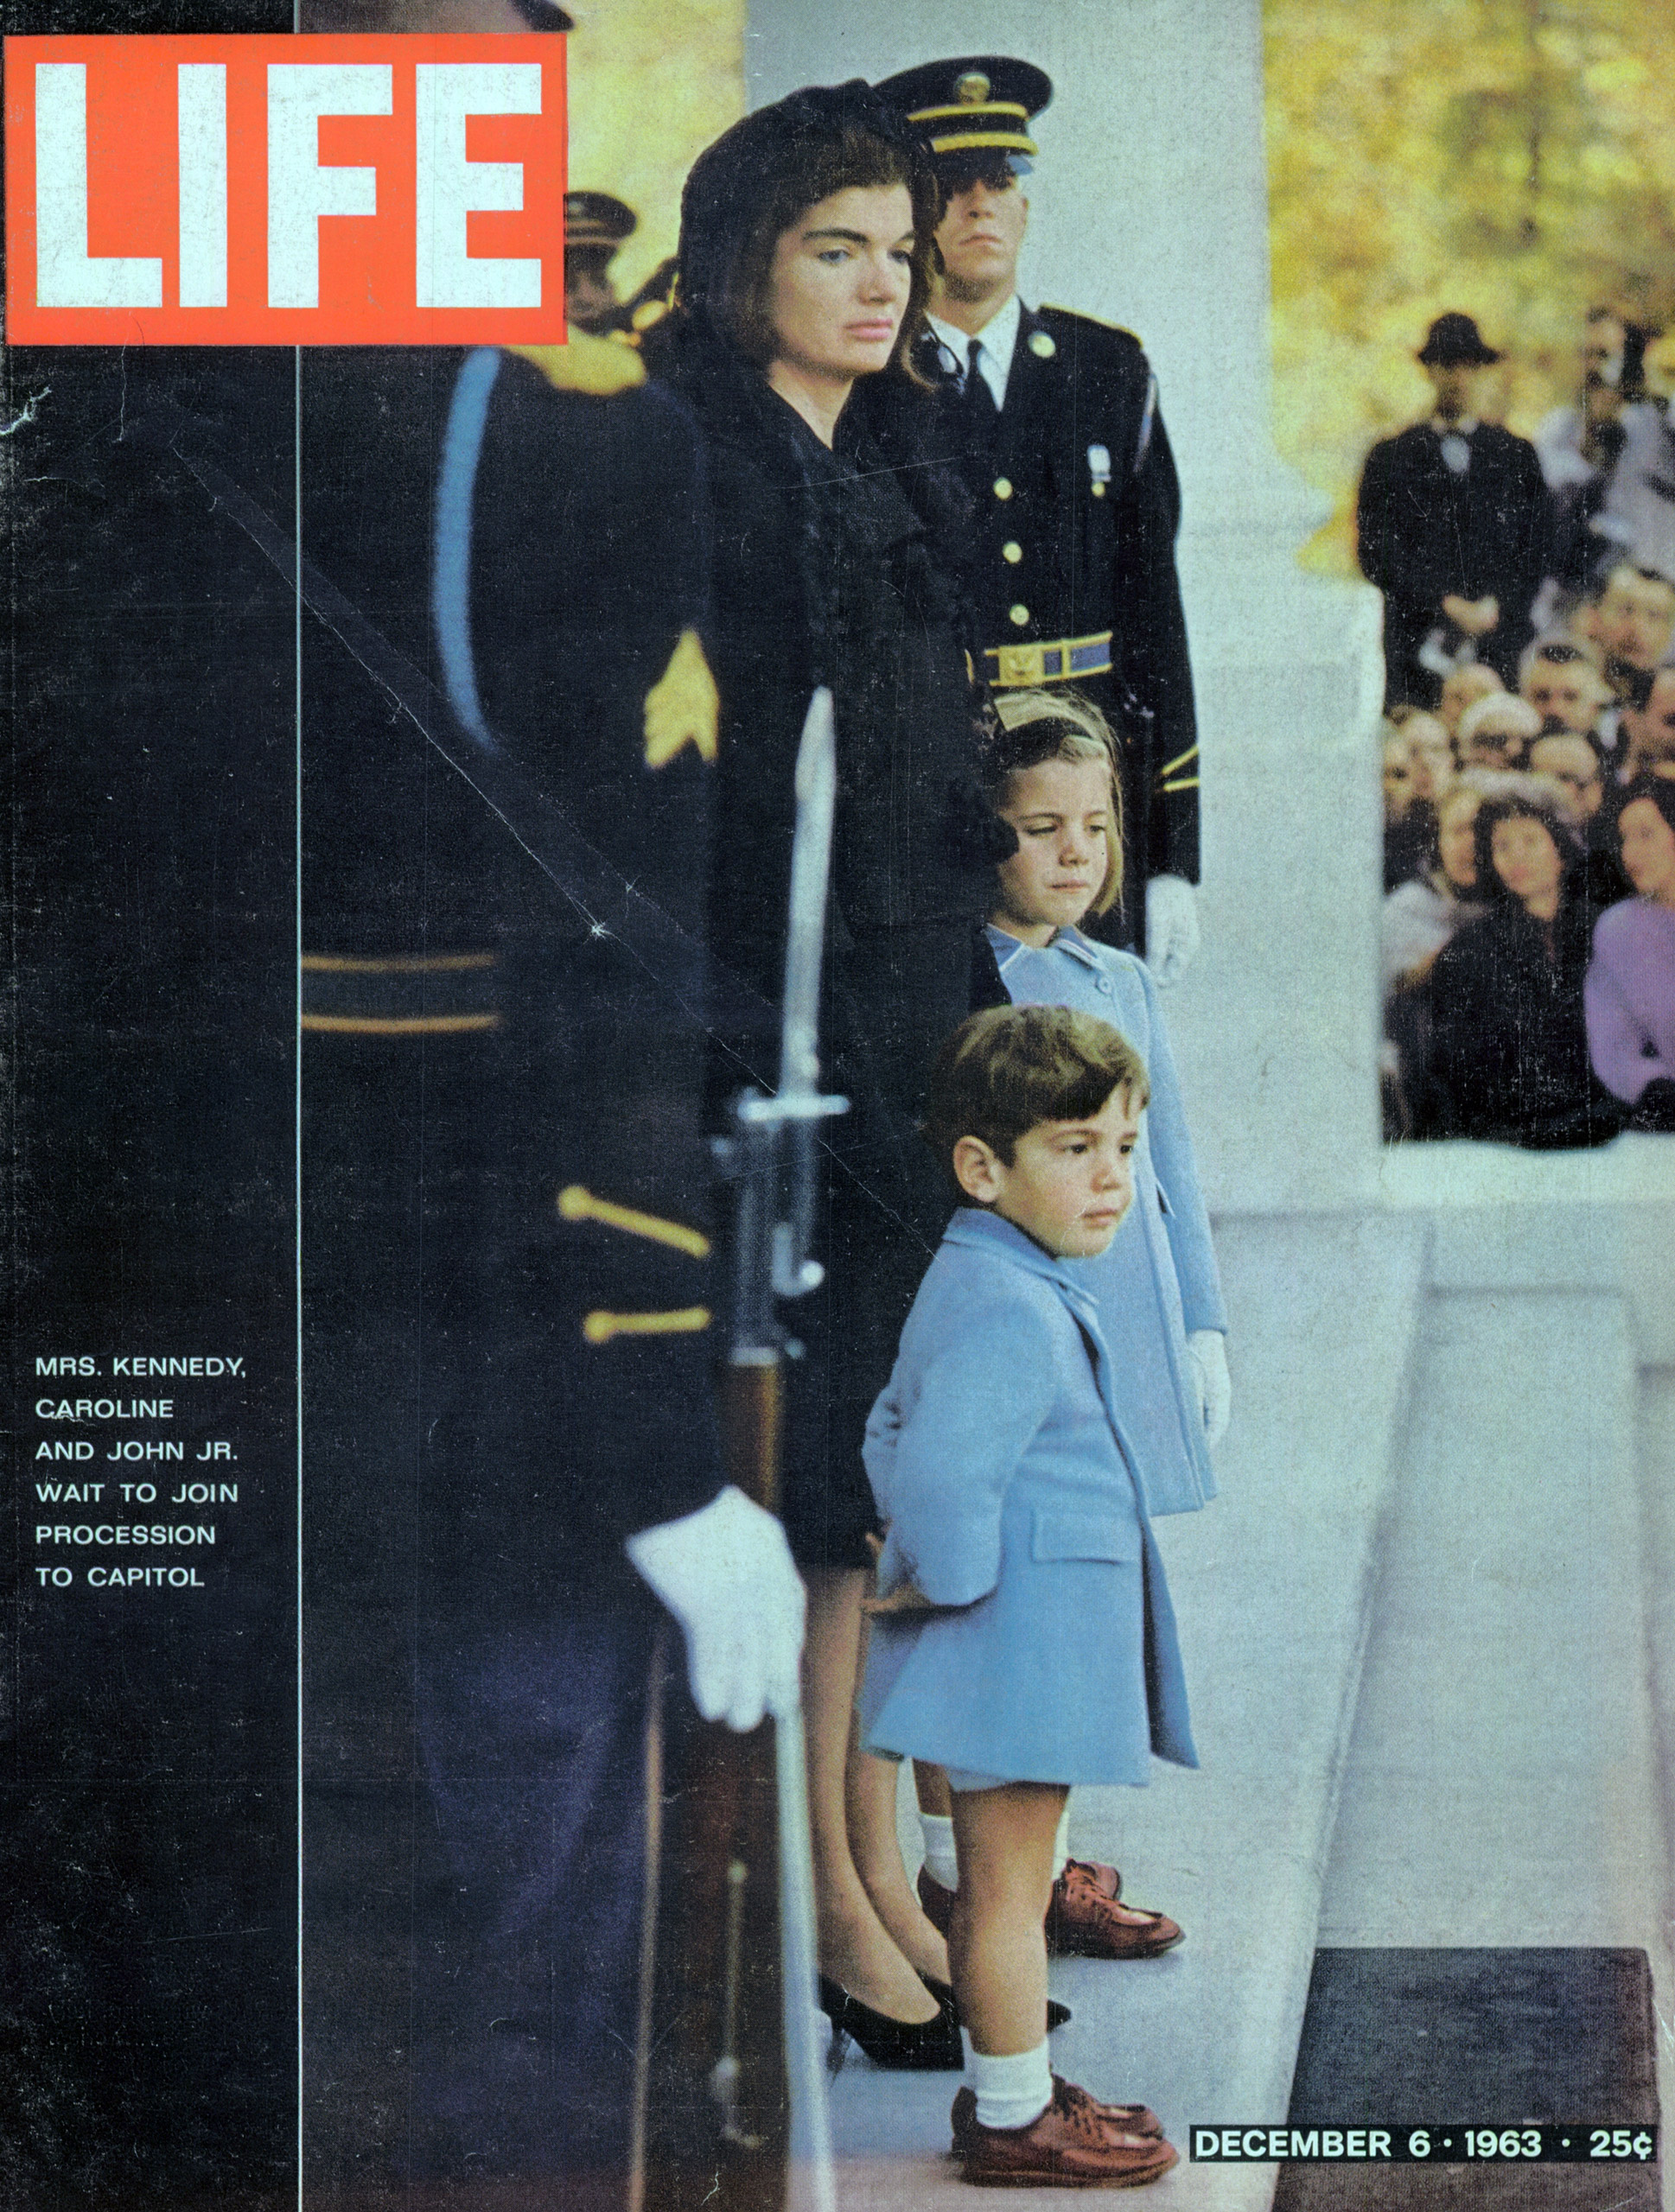 Dec. 6, 1963 cover of LIFE magazine. Cover photo by Fred Ward.